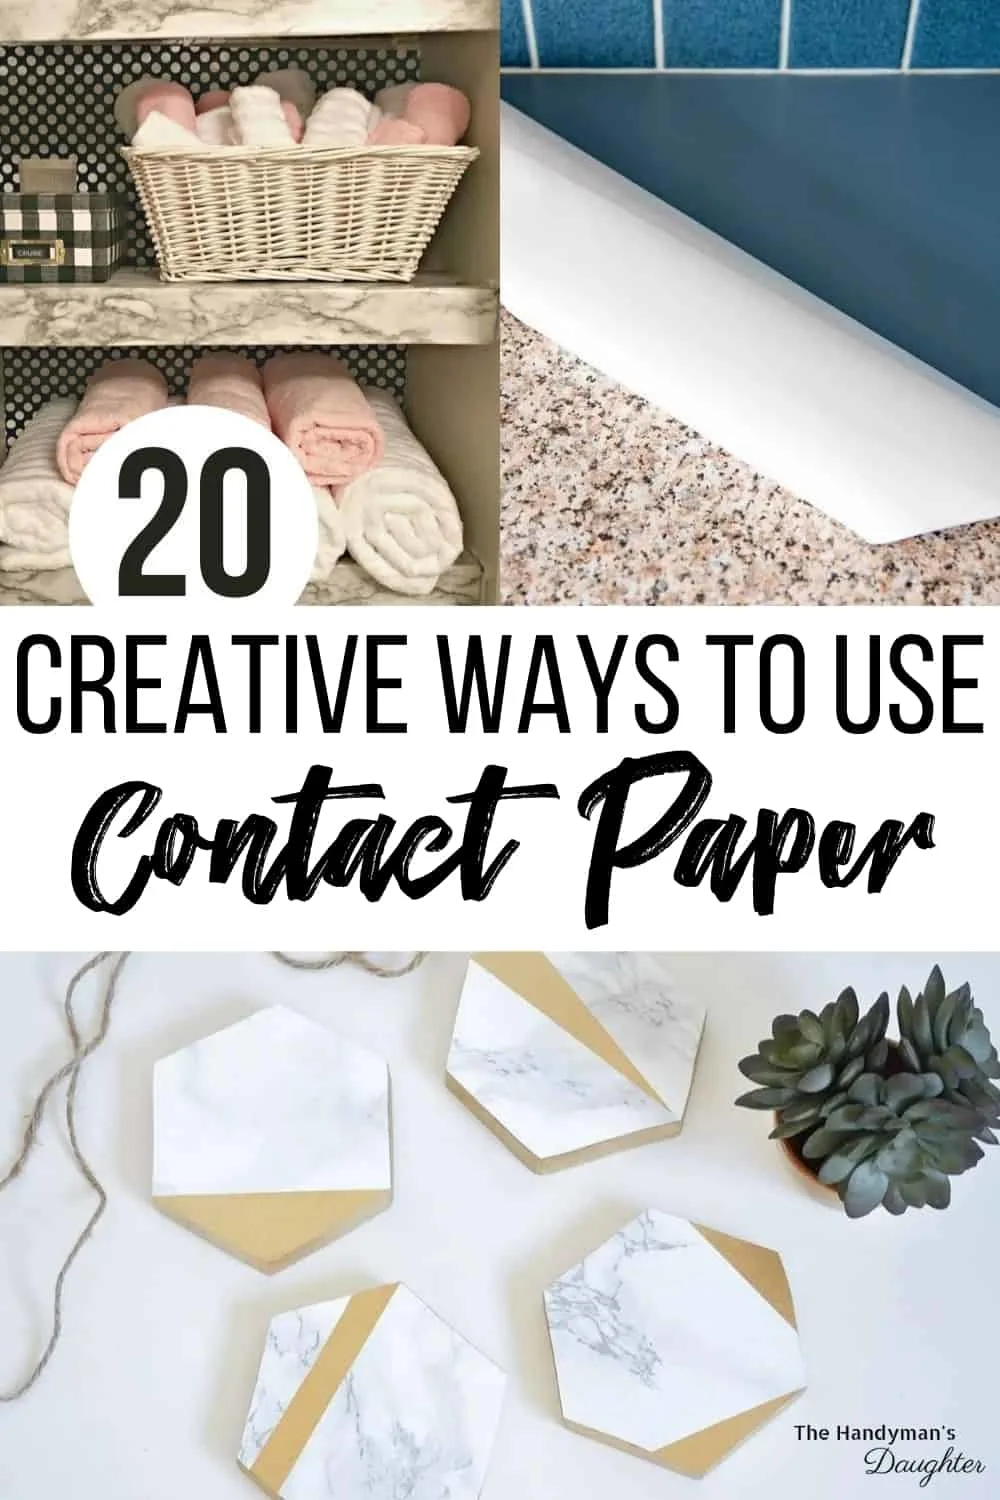 Tips for Using Stainless Steel Contact Paper • Craving Some Creativity